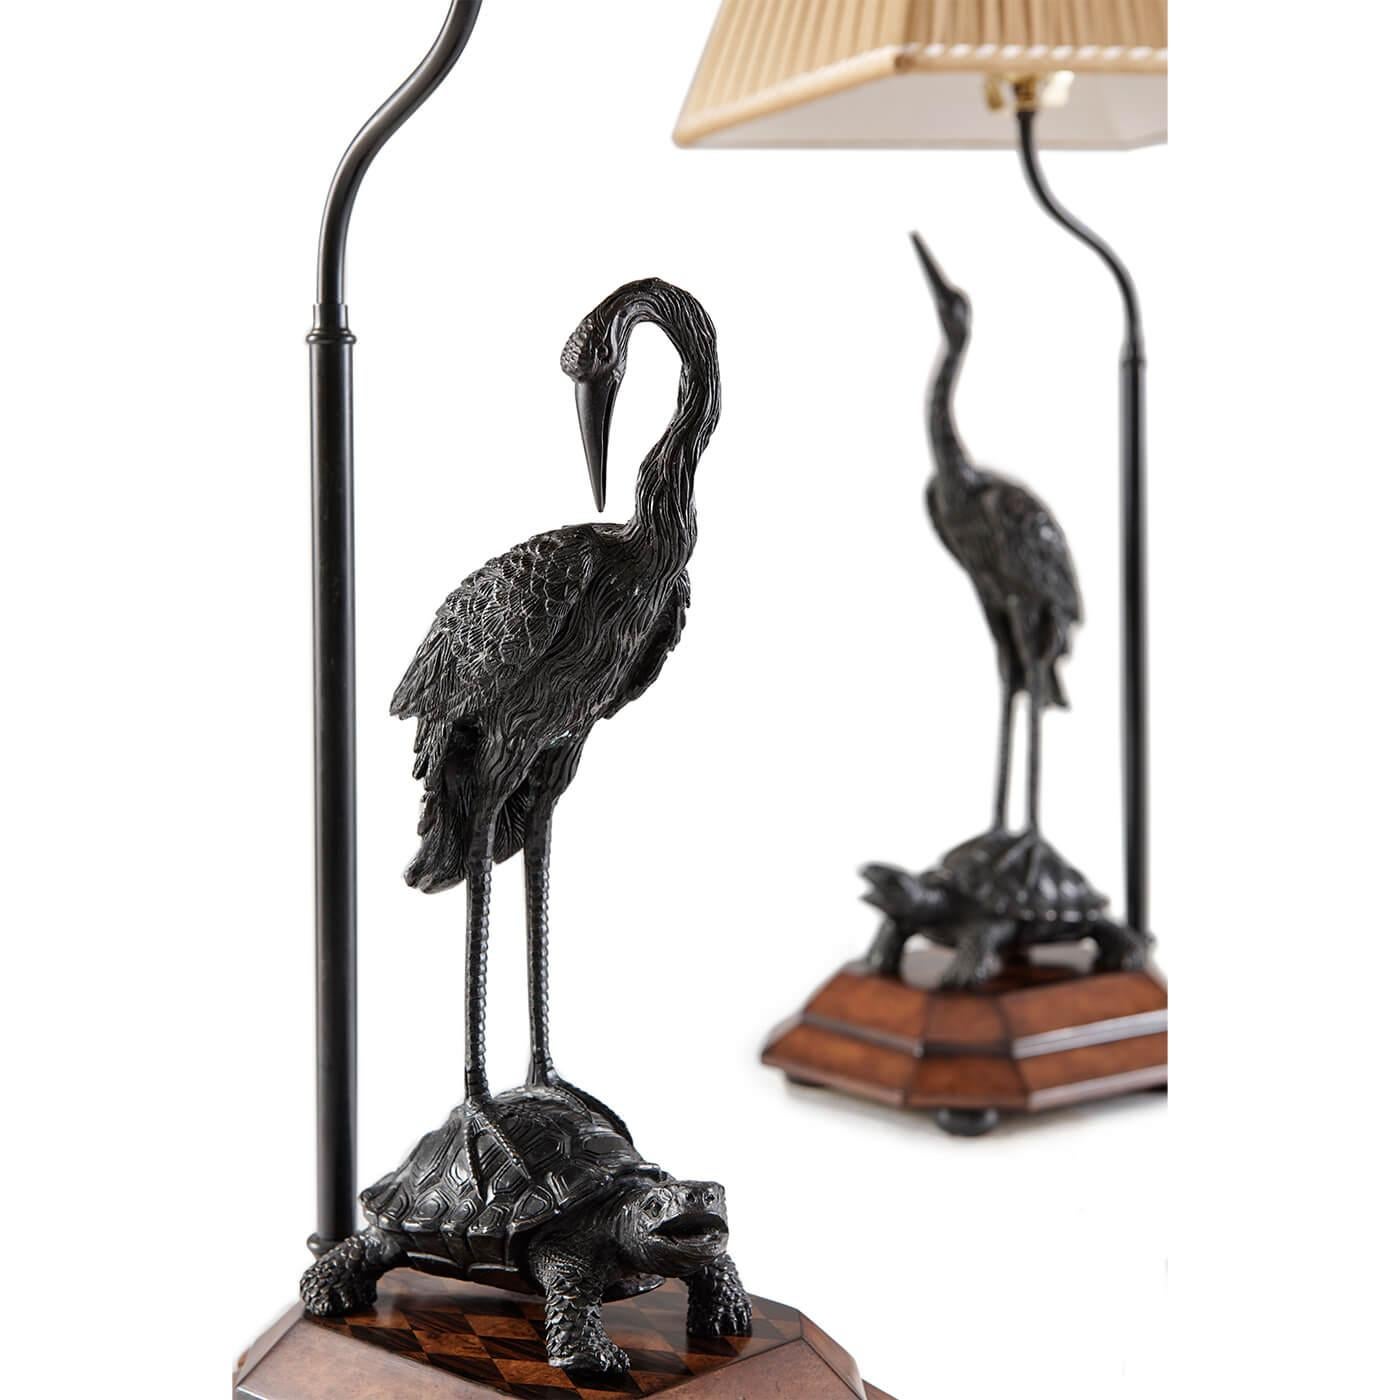 A pair of verdigris brass table lamps, each with a crane standing on a turtle, on burl plinth bases, with pleated silk shades. The originals Japanese Meiji period.

Dimensions: 10